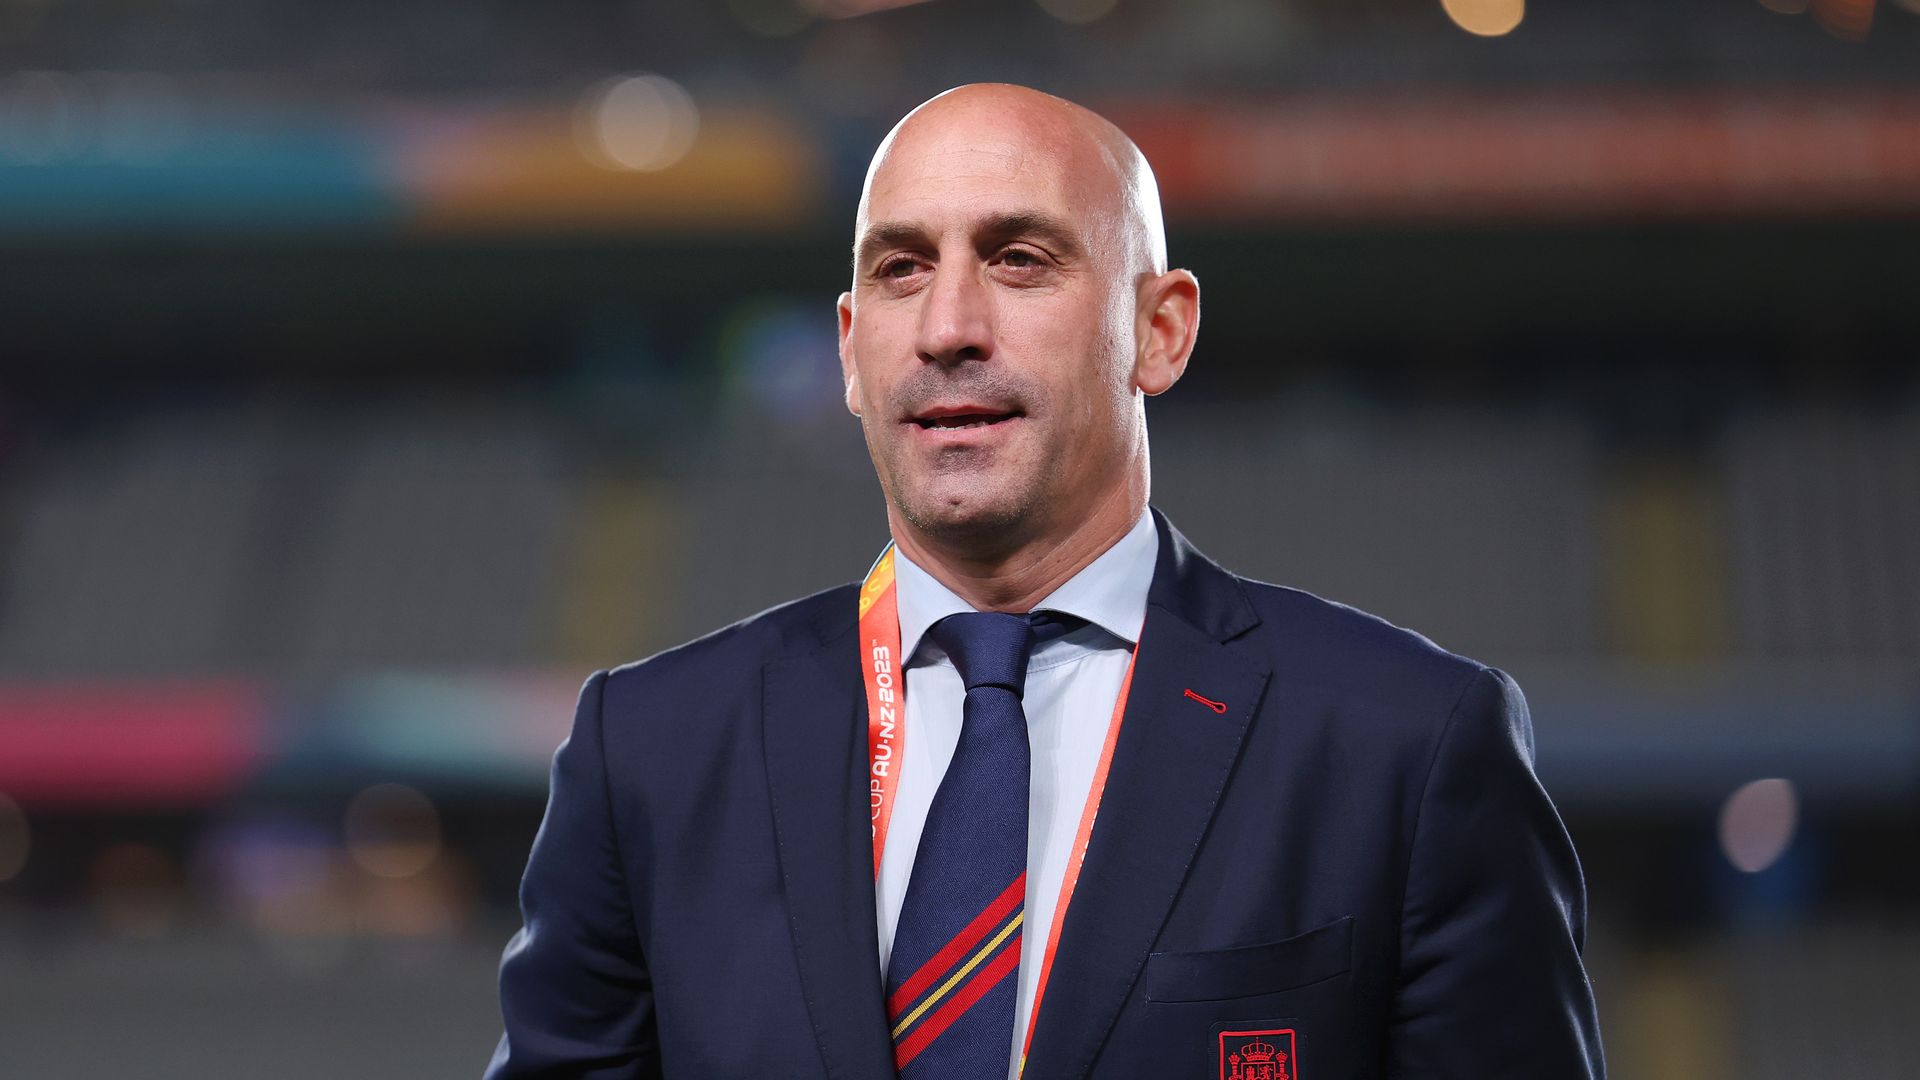 Luis Rubiales Resigns as President of Spain’s Soccer Federation Amid Controversy Over World Cup Kiss